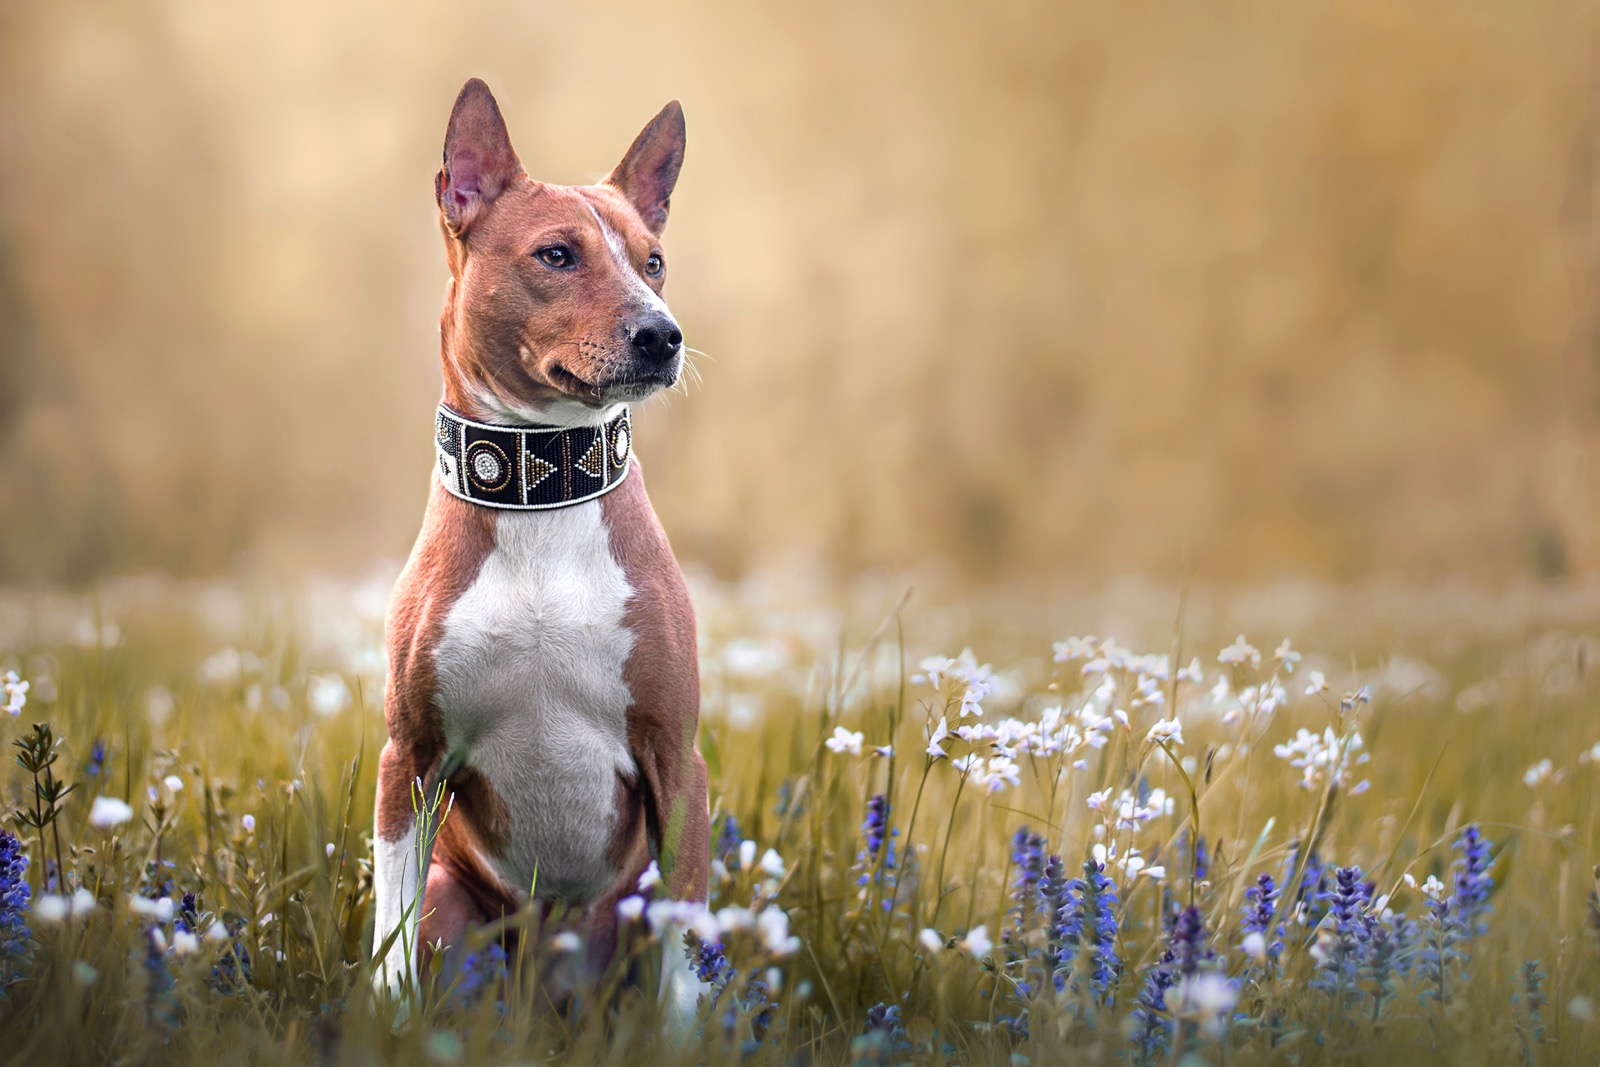 What Wild Animal Are You? Basenji